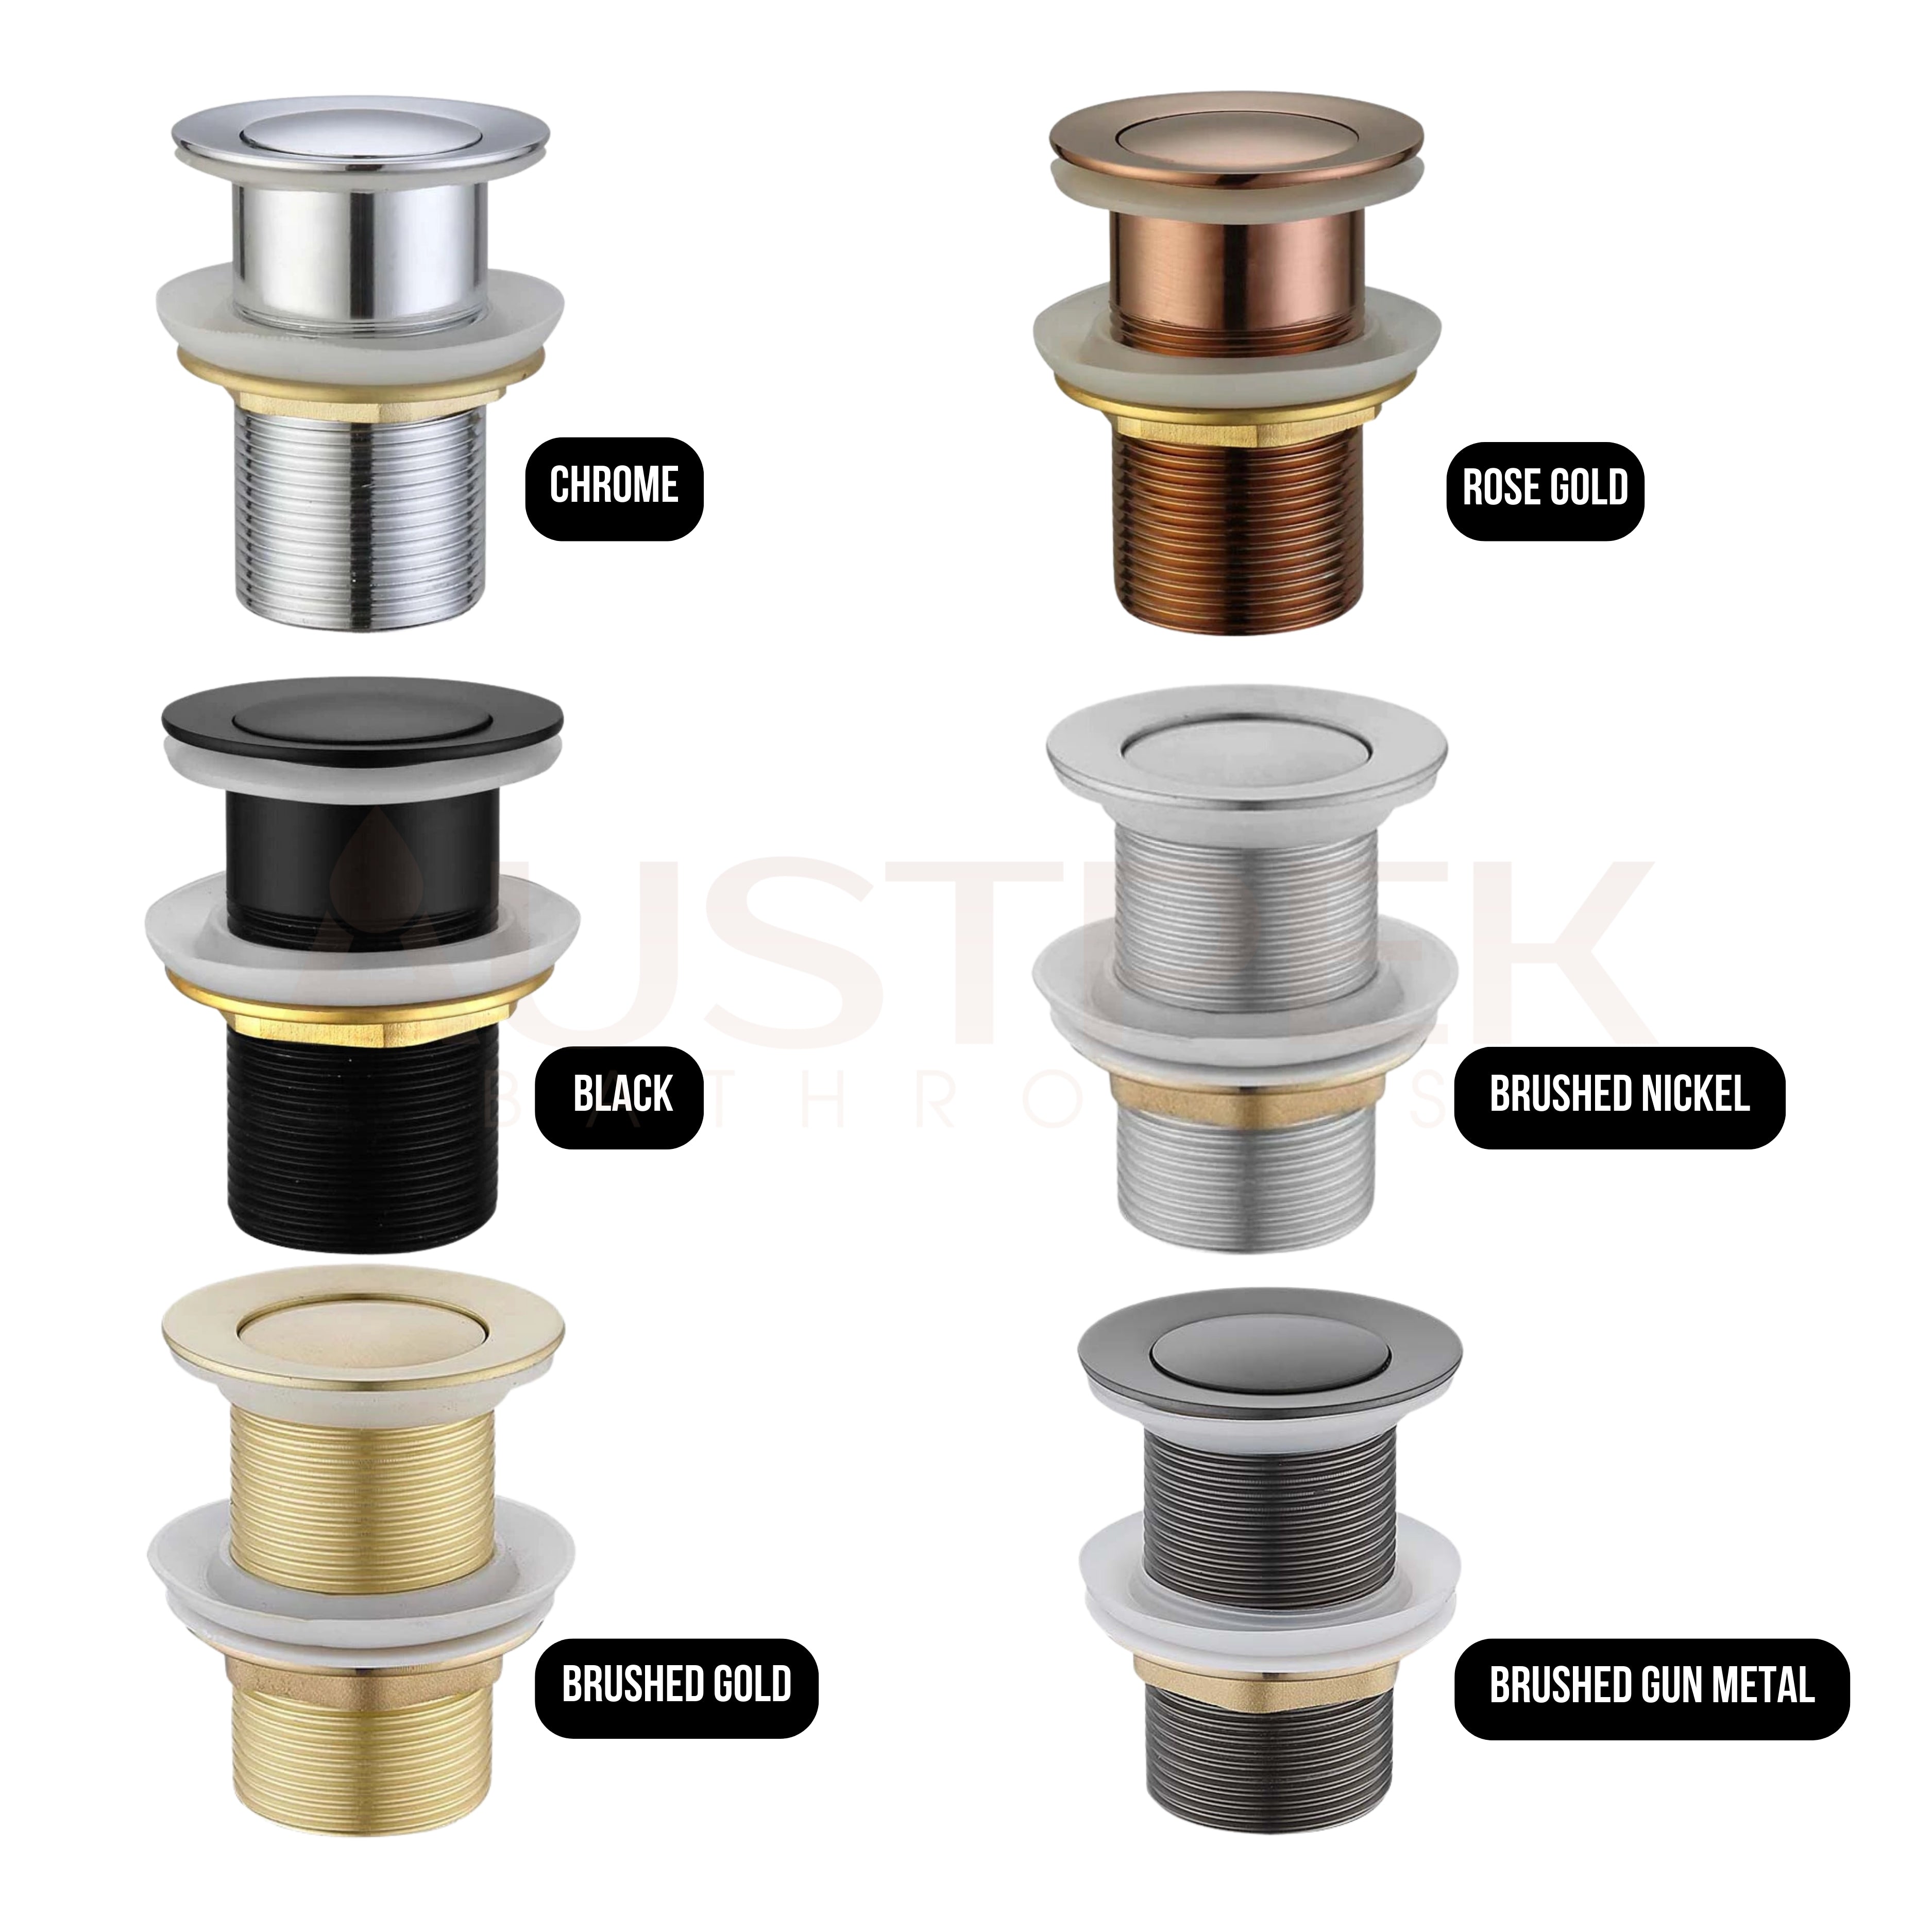 HELLYCAR PUSH PLUG WASTE NON-OVERFLOW BRUSHED GOLD 32MM